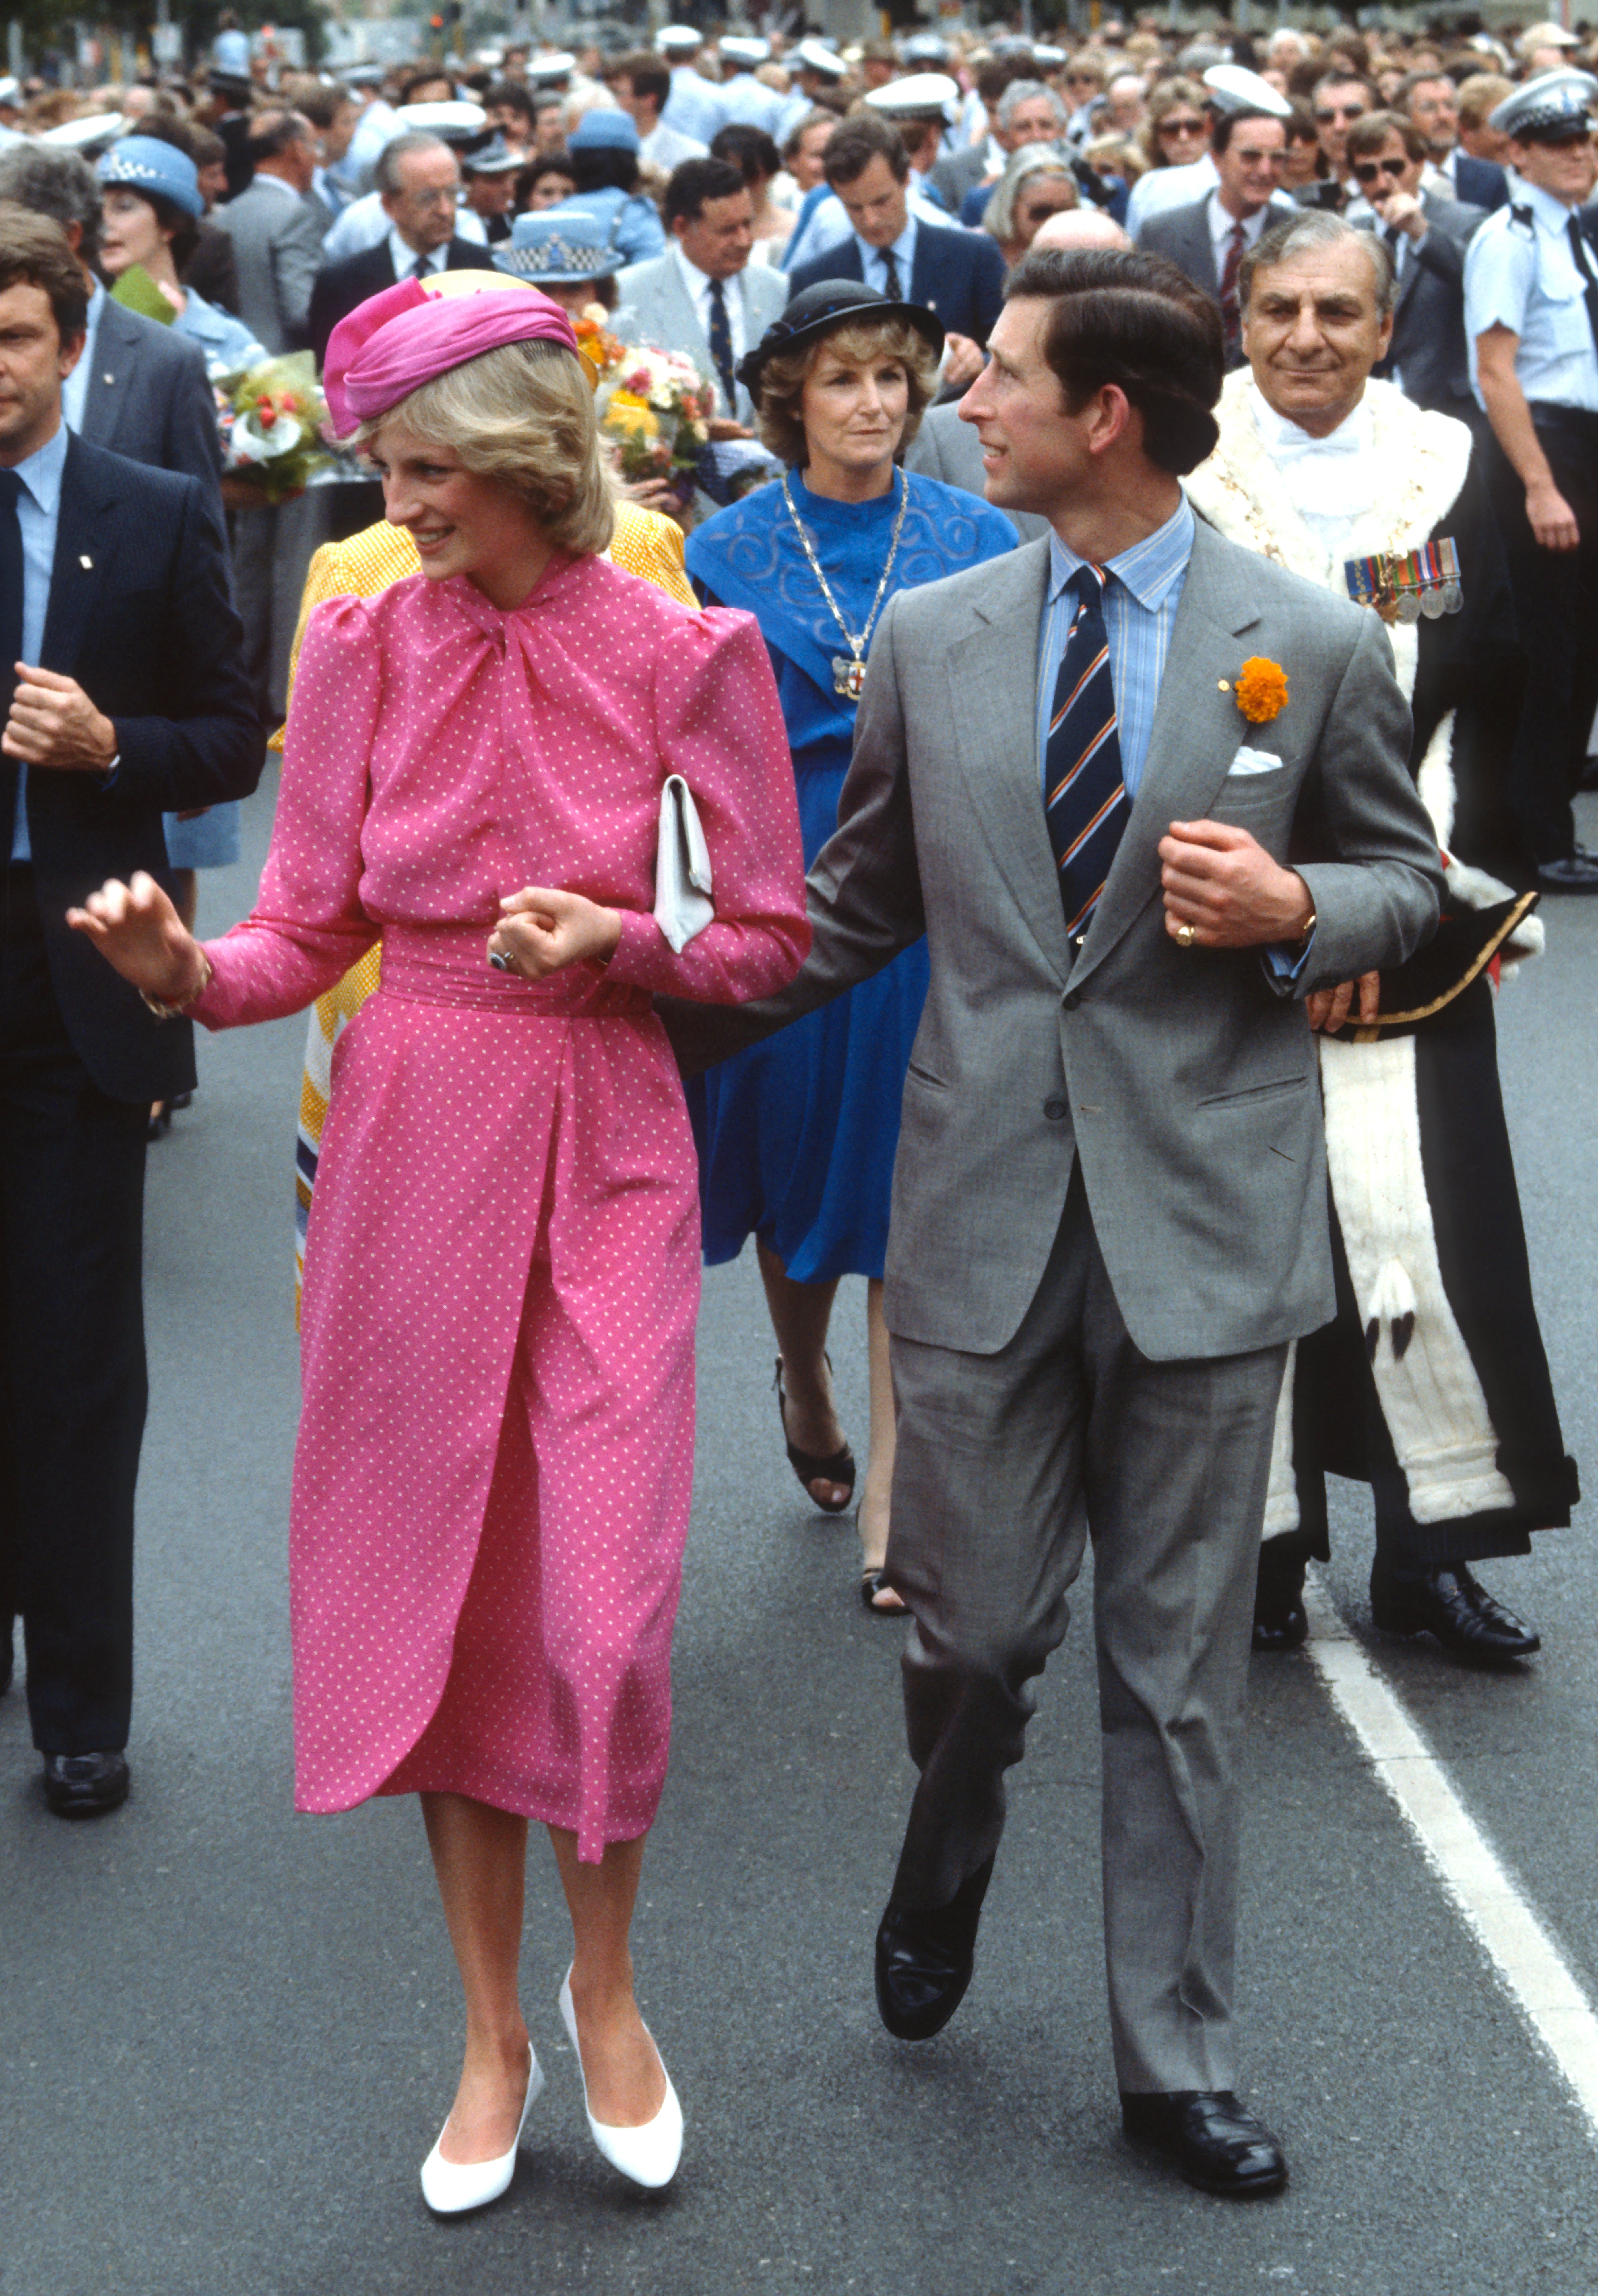 King Charles III and Princess Diana during a walkabout on April 7, 1983, in Perth, Australia. | Source: Getty Images